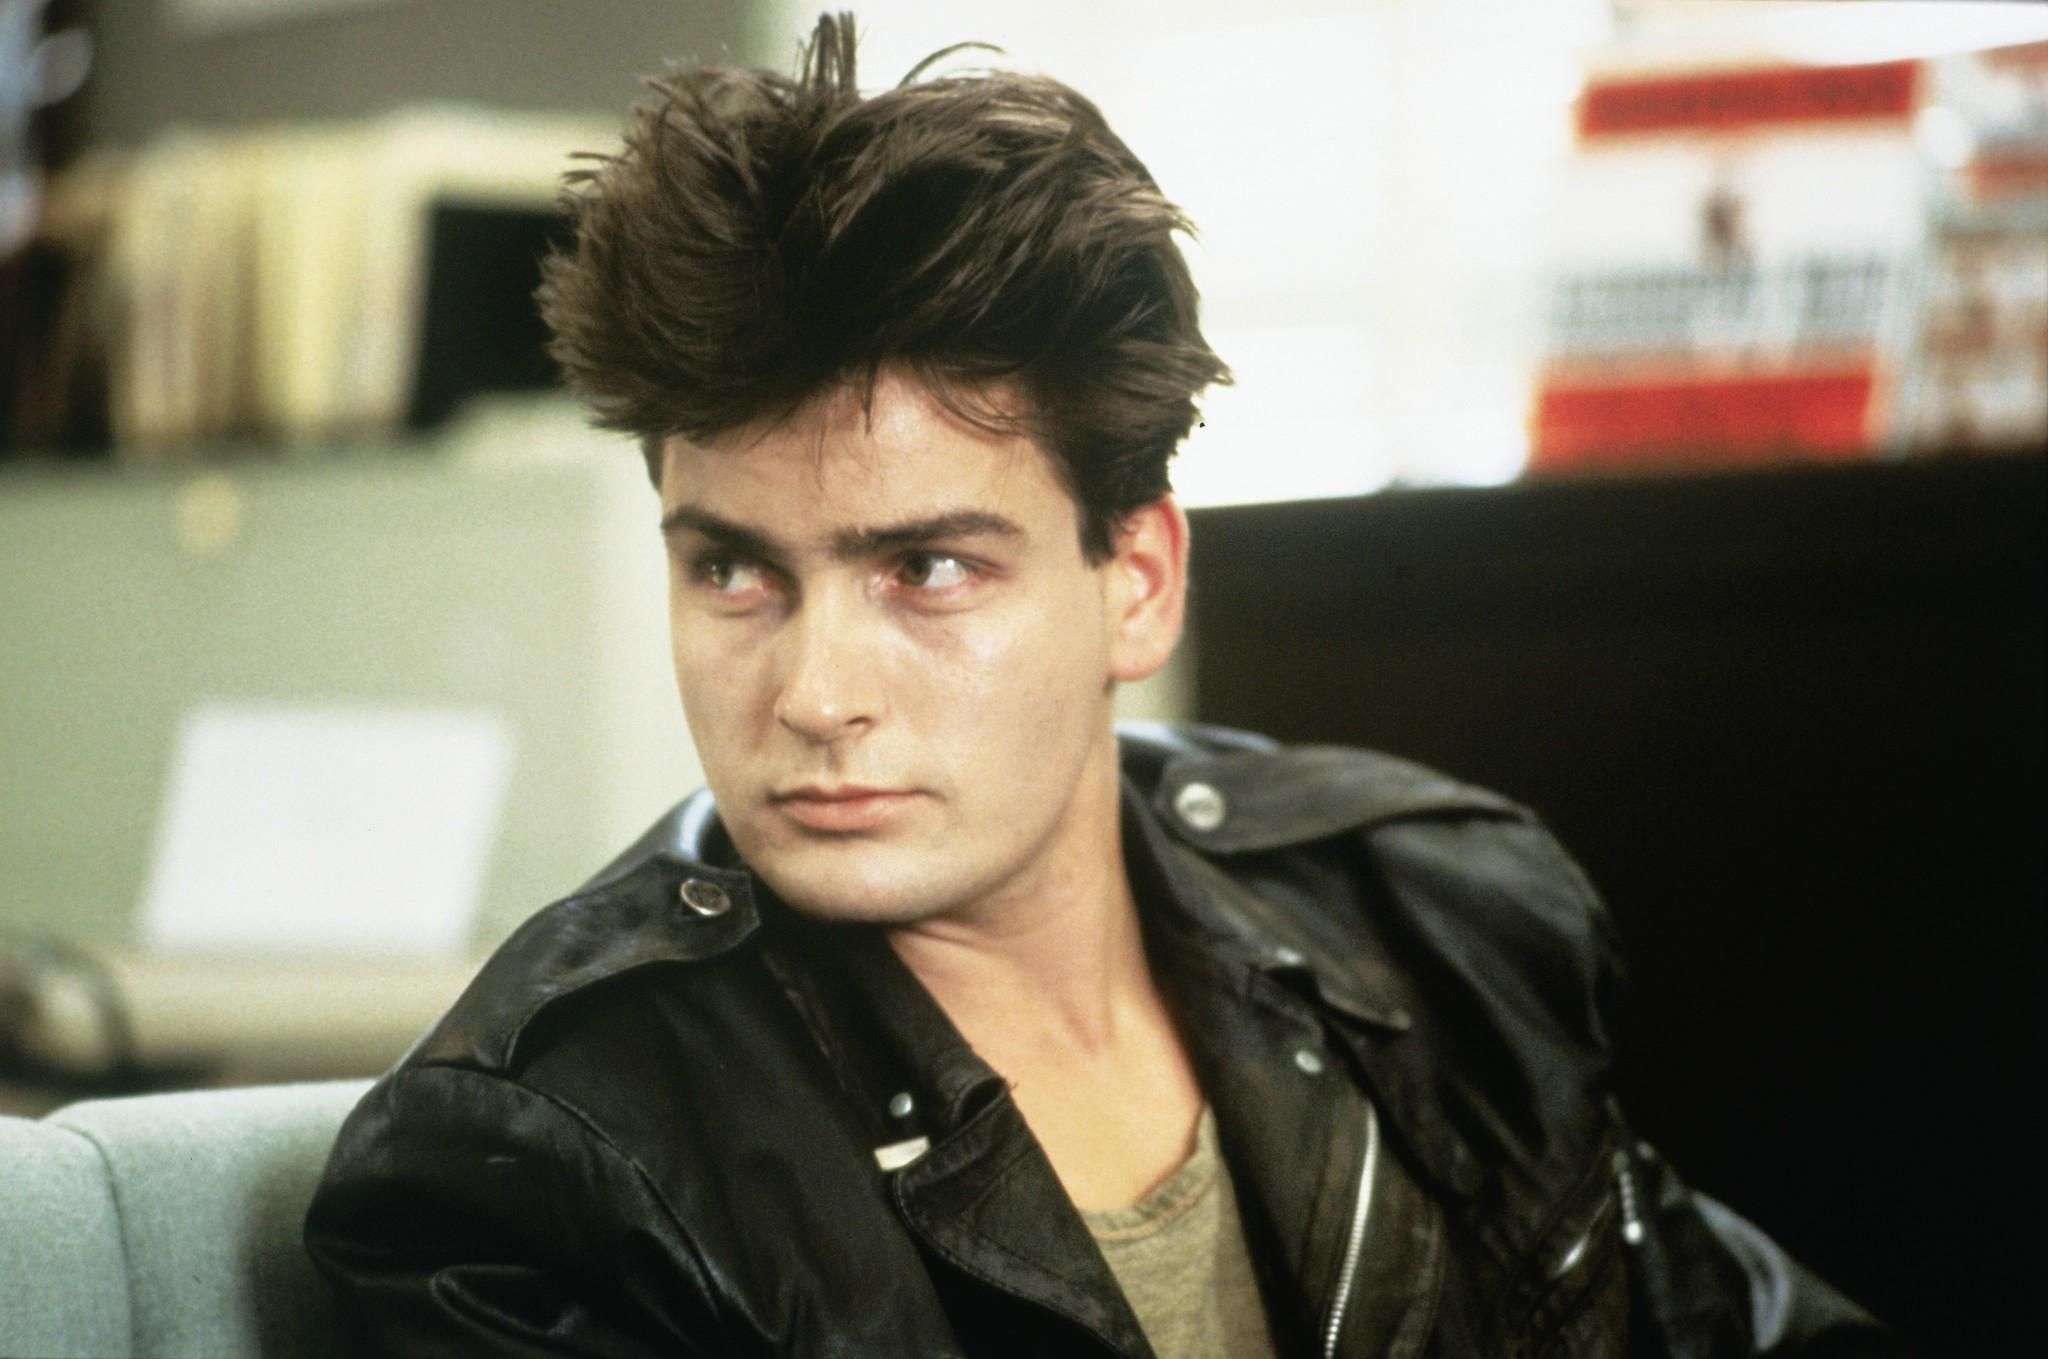 Charlie Sheen as Garth sitting in the police station in Ferris Bueller's Day Off